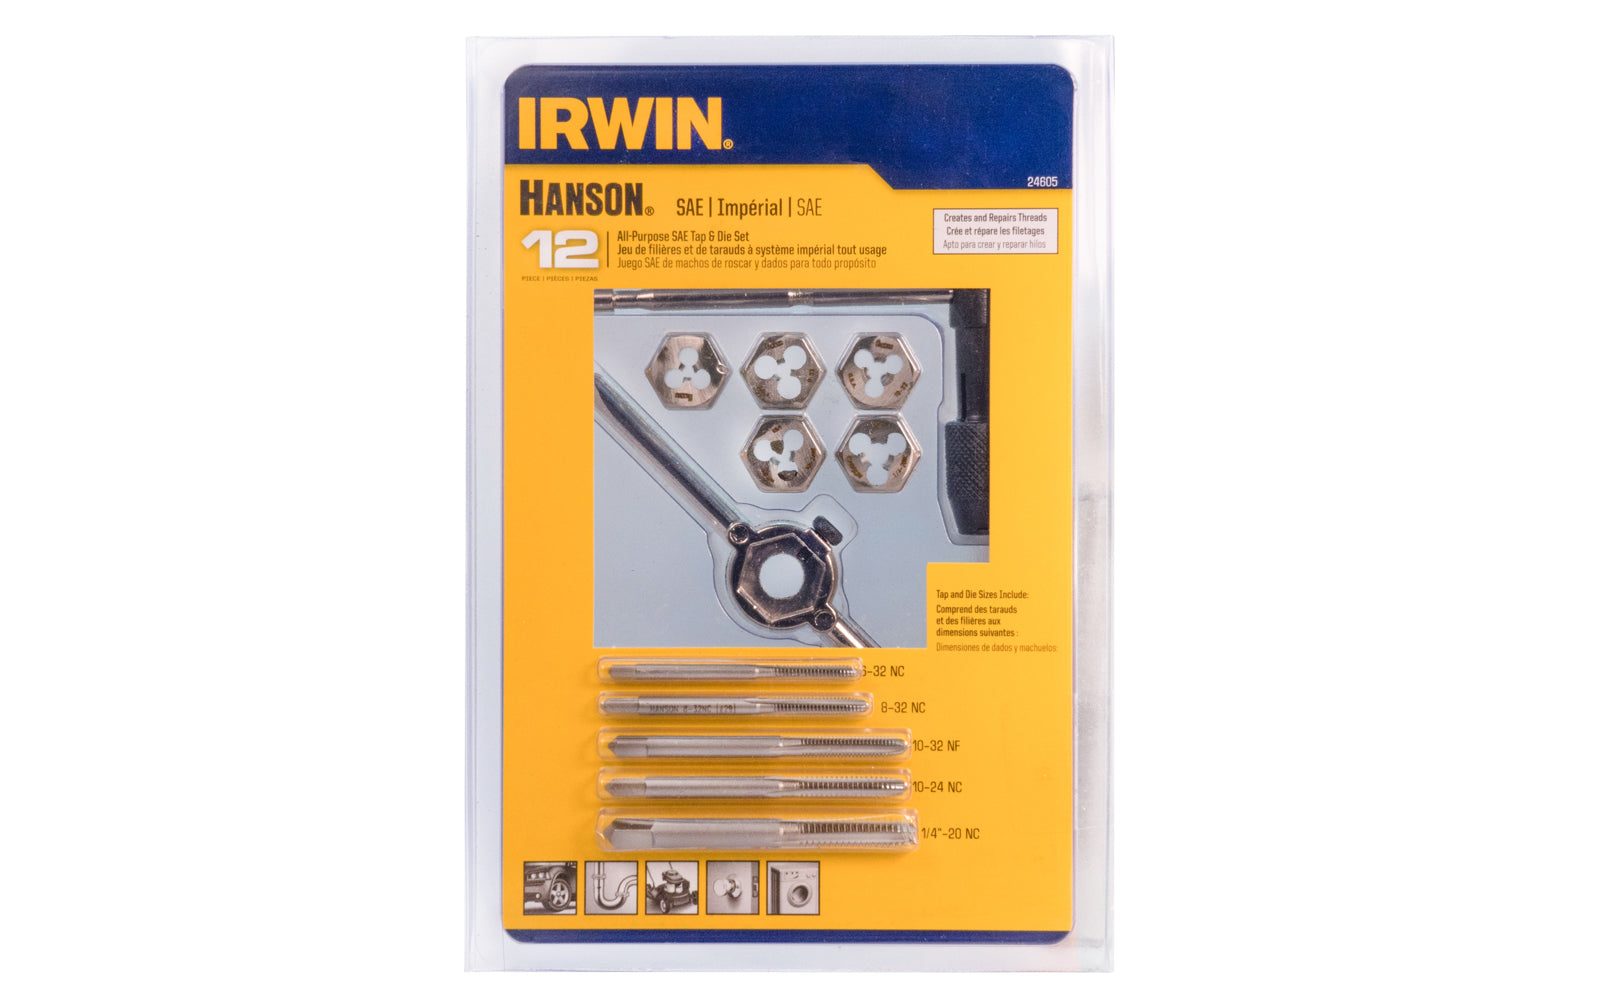 Irwin Hanson 12 PC SAE Tap & Die Set - 24605 includes the following items: Machine Screw Plug Tap and 5/8" Hexagon Dies in sizes: 6-32 NC, 8-32 NC, 10-24 NC, 10-32 NF. Fractional Plug Tap and 5/8 " Hexagon Dies in size: 1/4-20 NC. T-Handle Tap Wrench. 042526246050